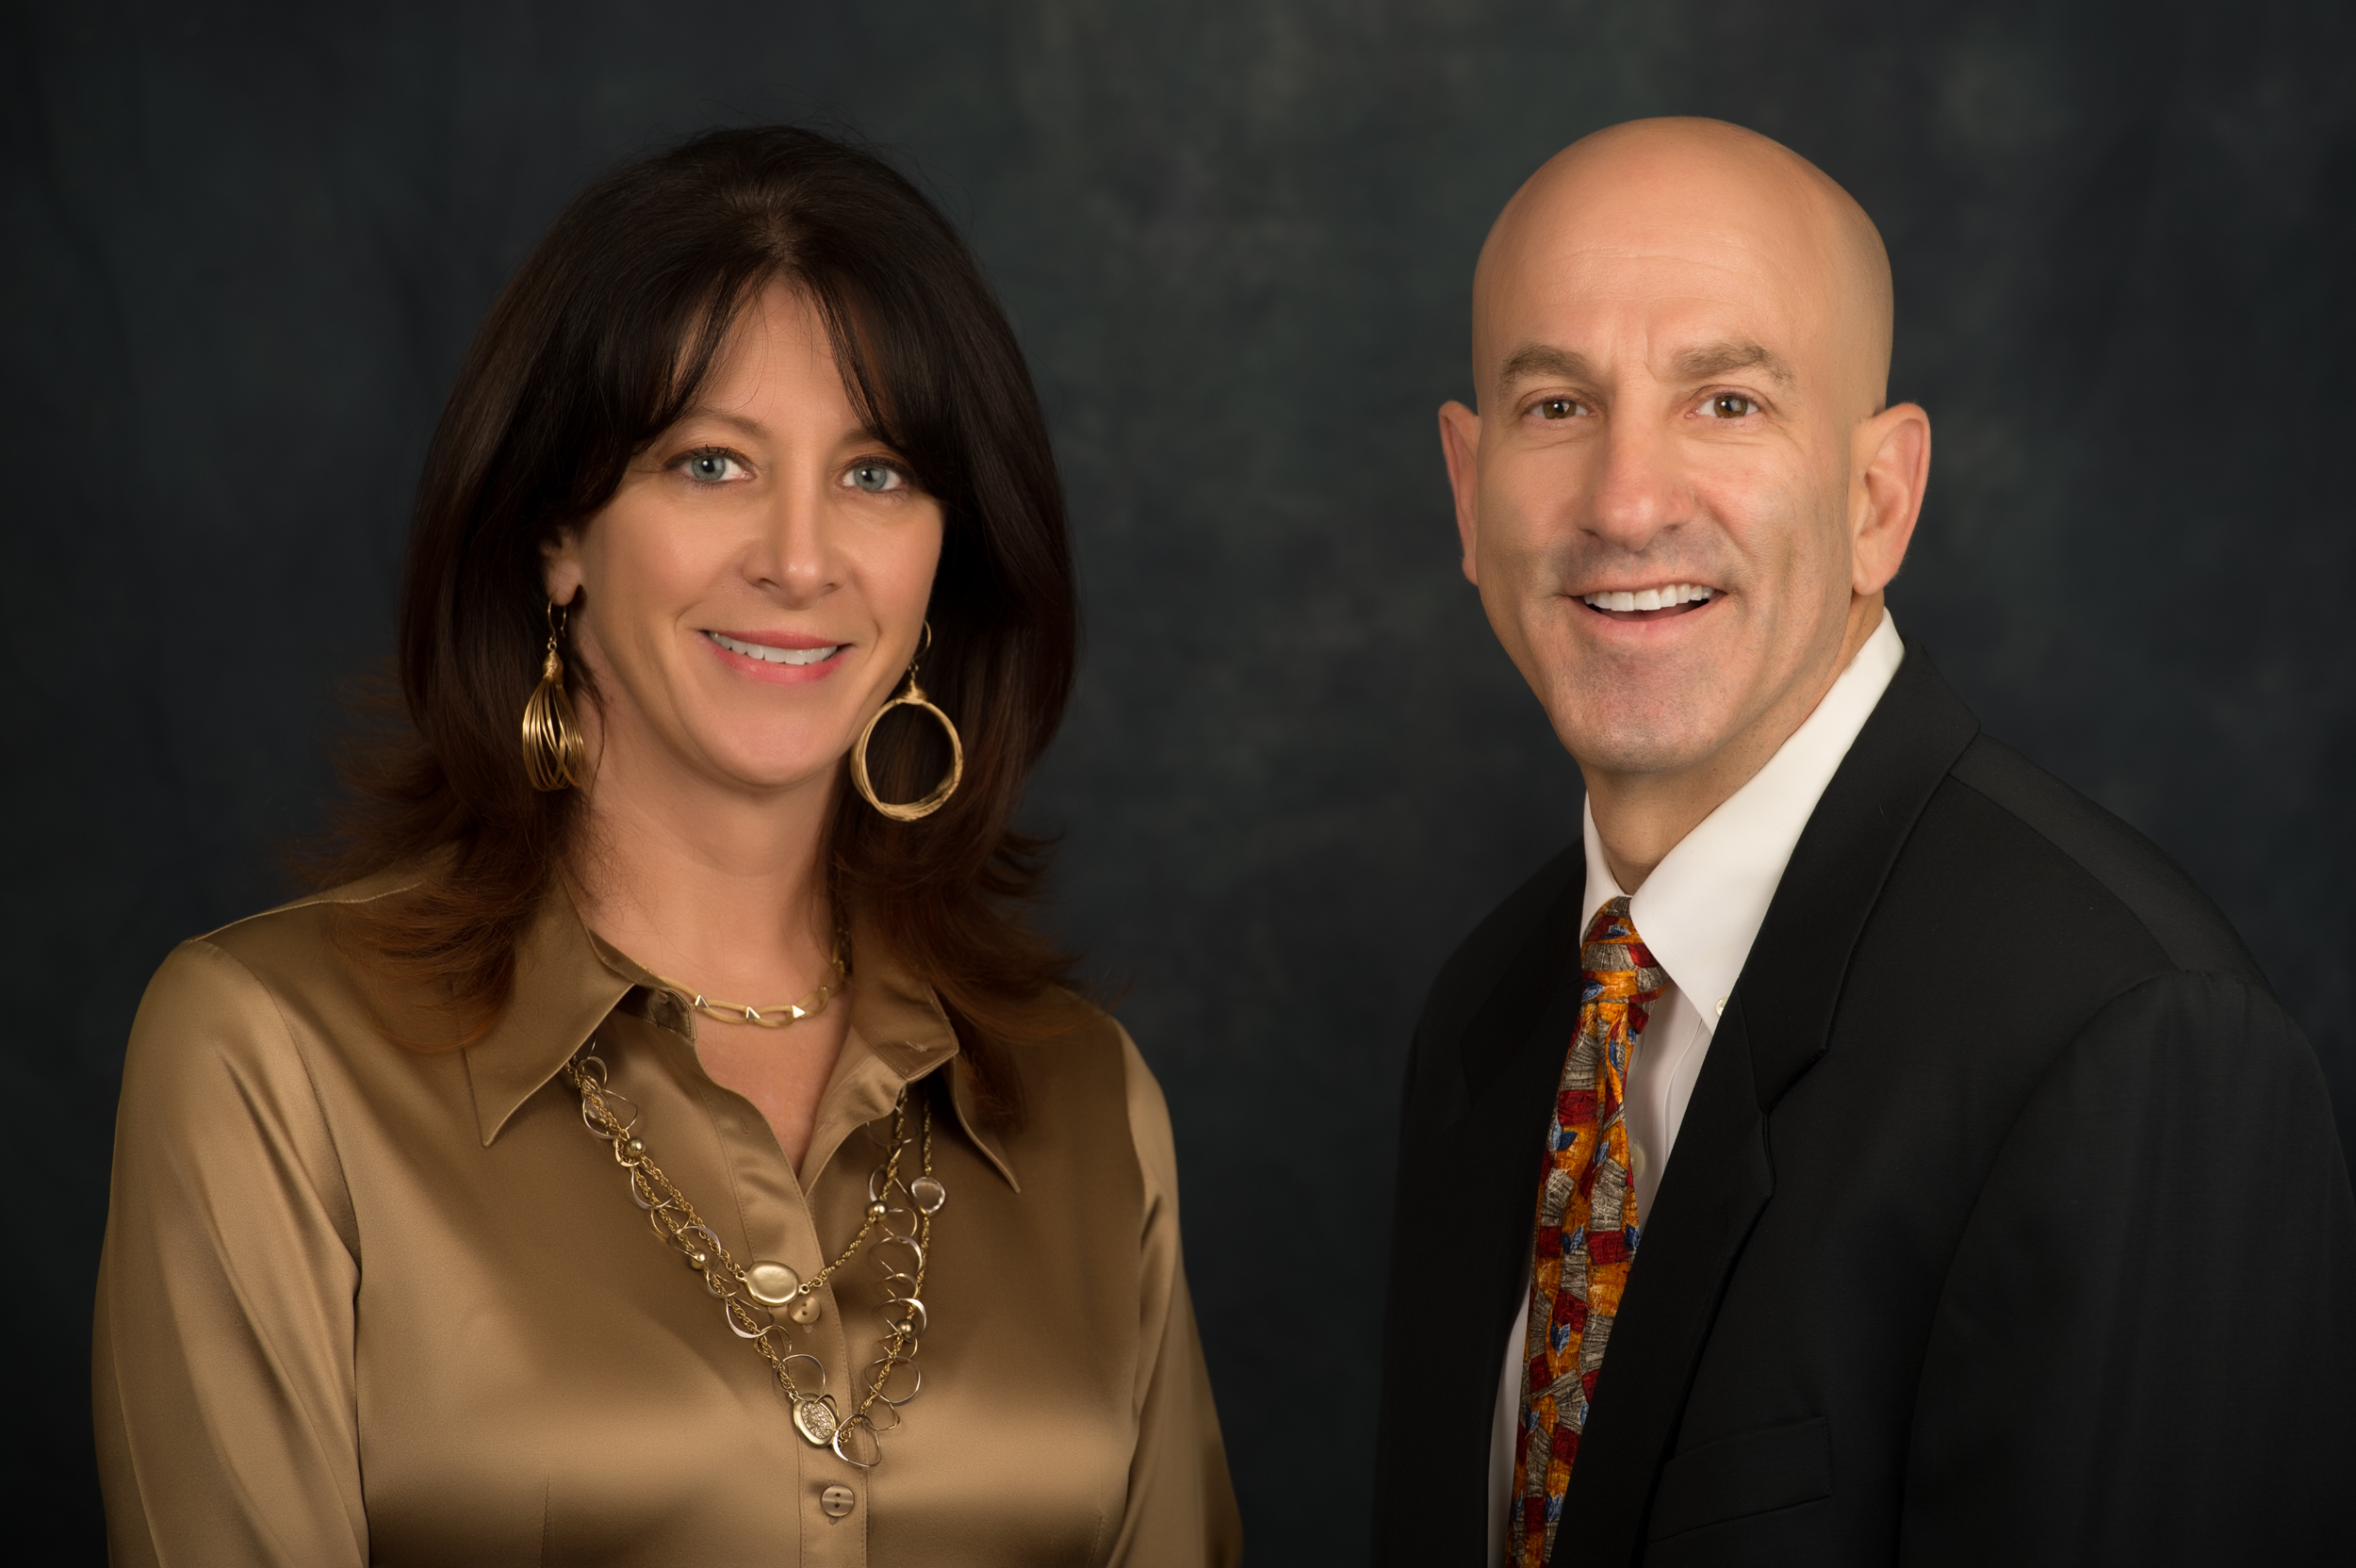 Ellen S. Morris, Esq. and Howard S. Krooks, Esq., CELA, CAP, partners of Elder Law Associates PA, headquartered in Boca Raton, FL, are offering free legal documents for healthcare workers in Florida.